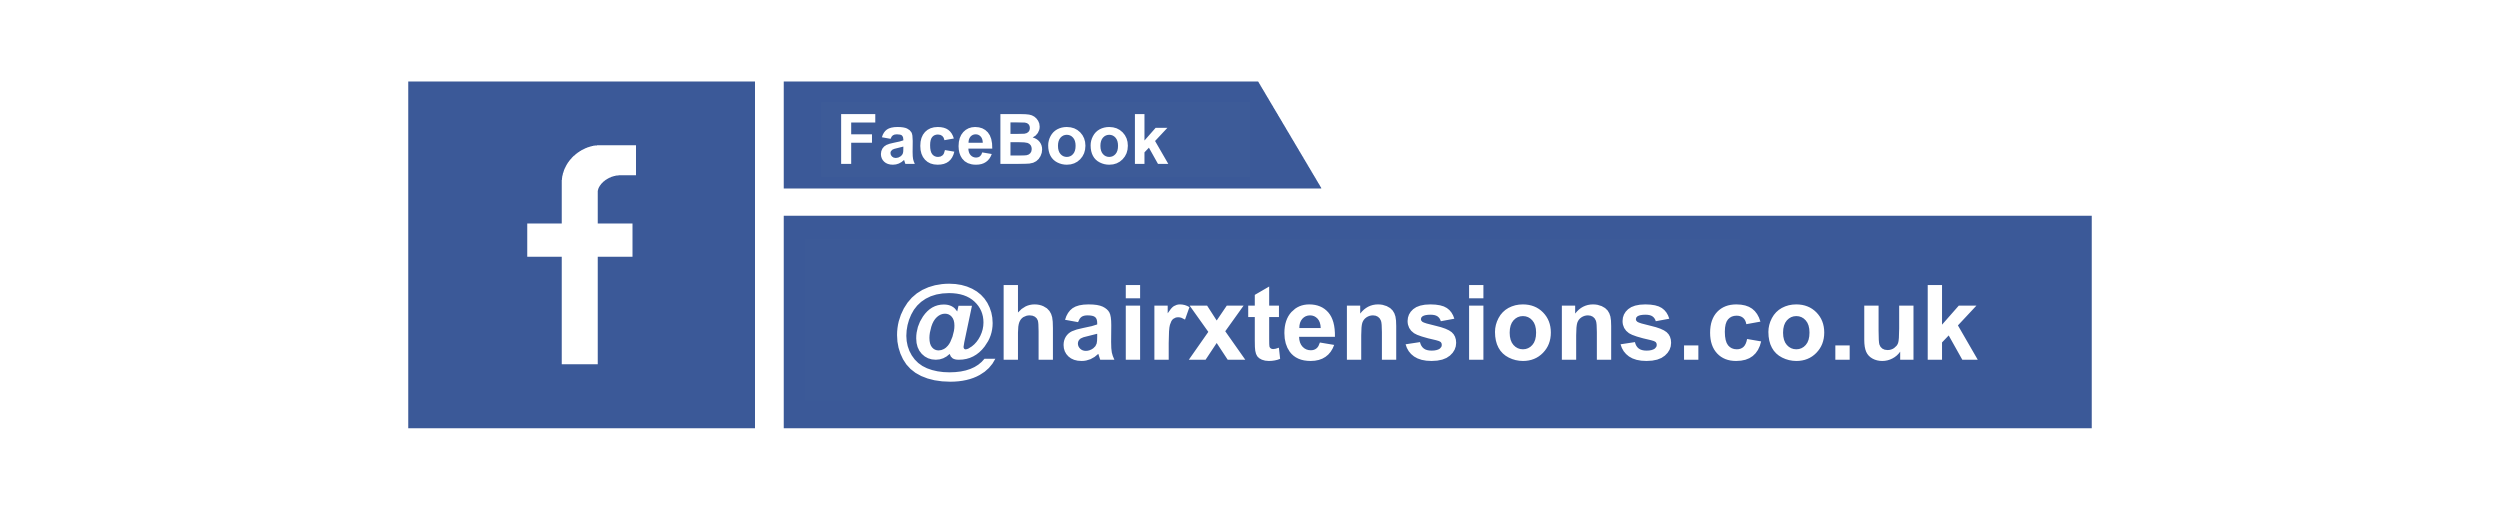 HairXtensions on Facebook